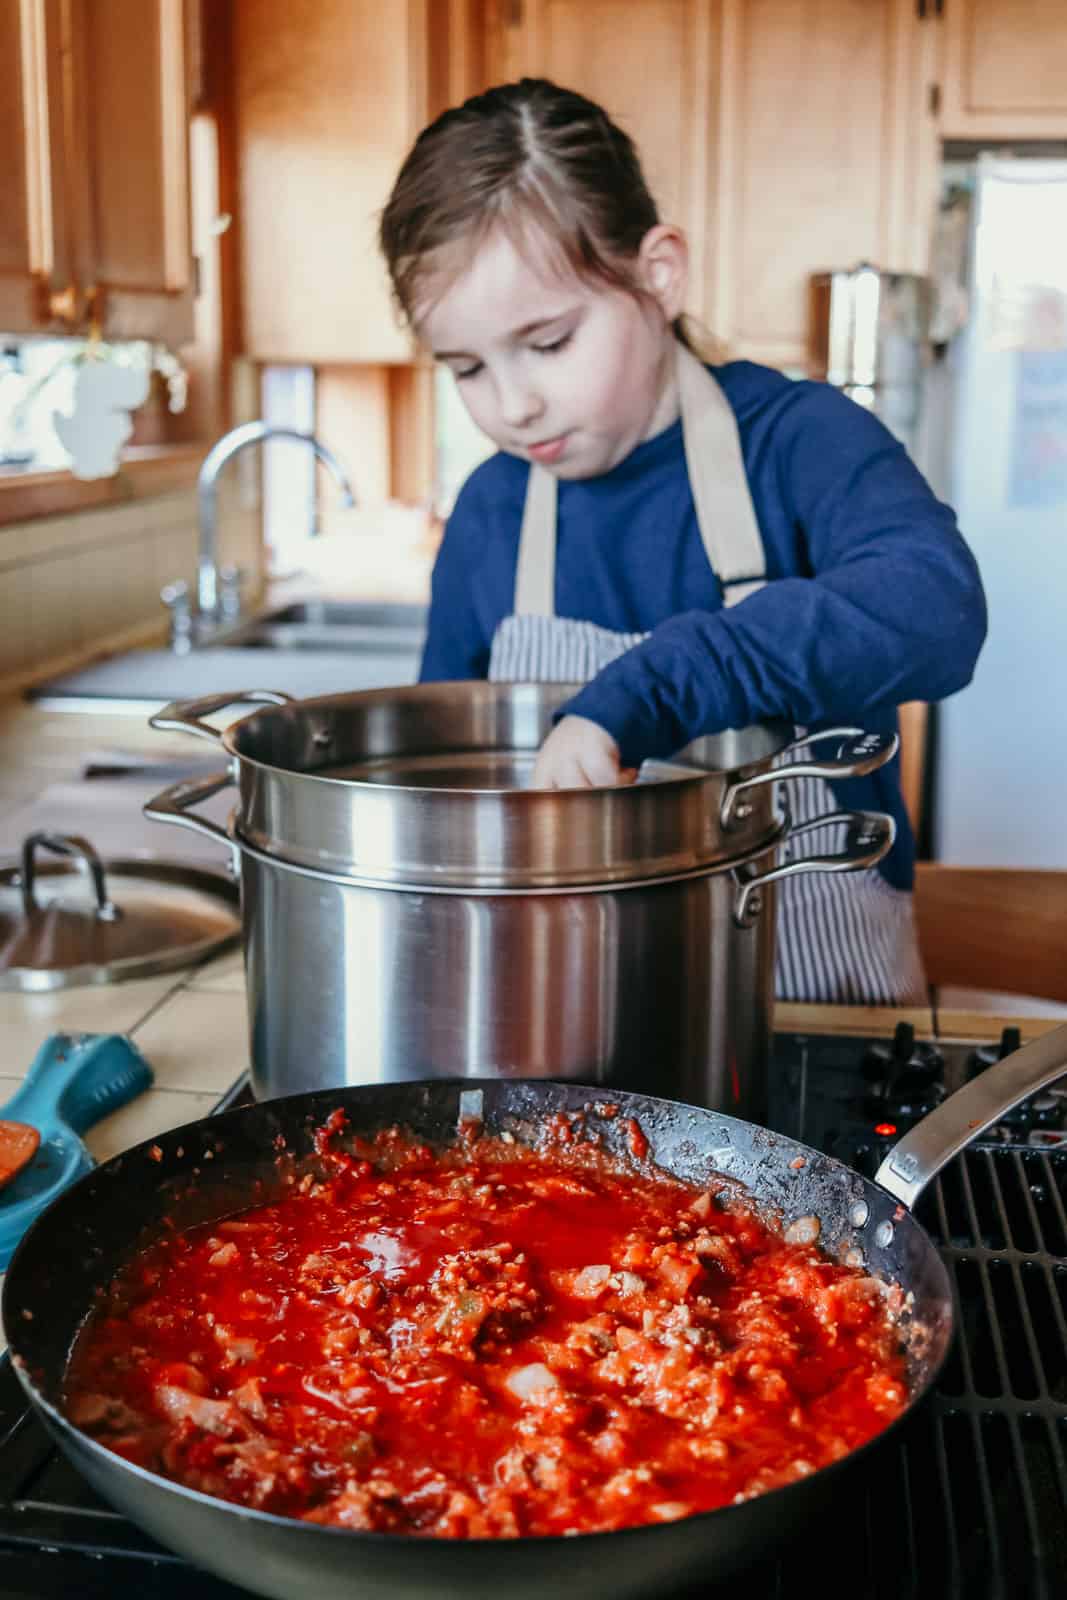 pasta sauce cooking in a carbon steel pan in front of a stock pot with pasta insert. a child is standing over the stock pot and reaching in